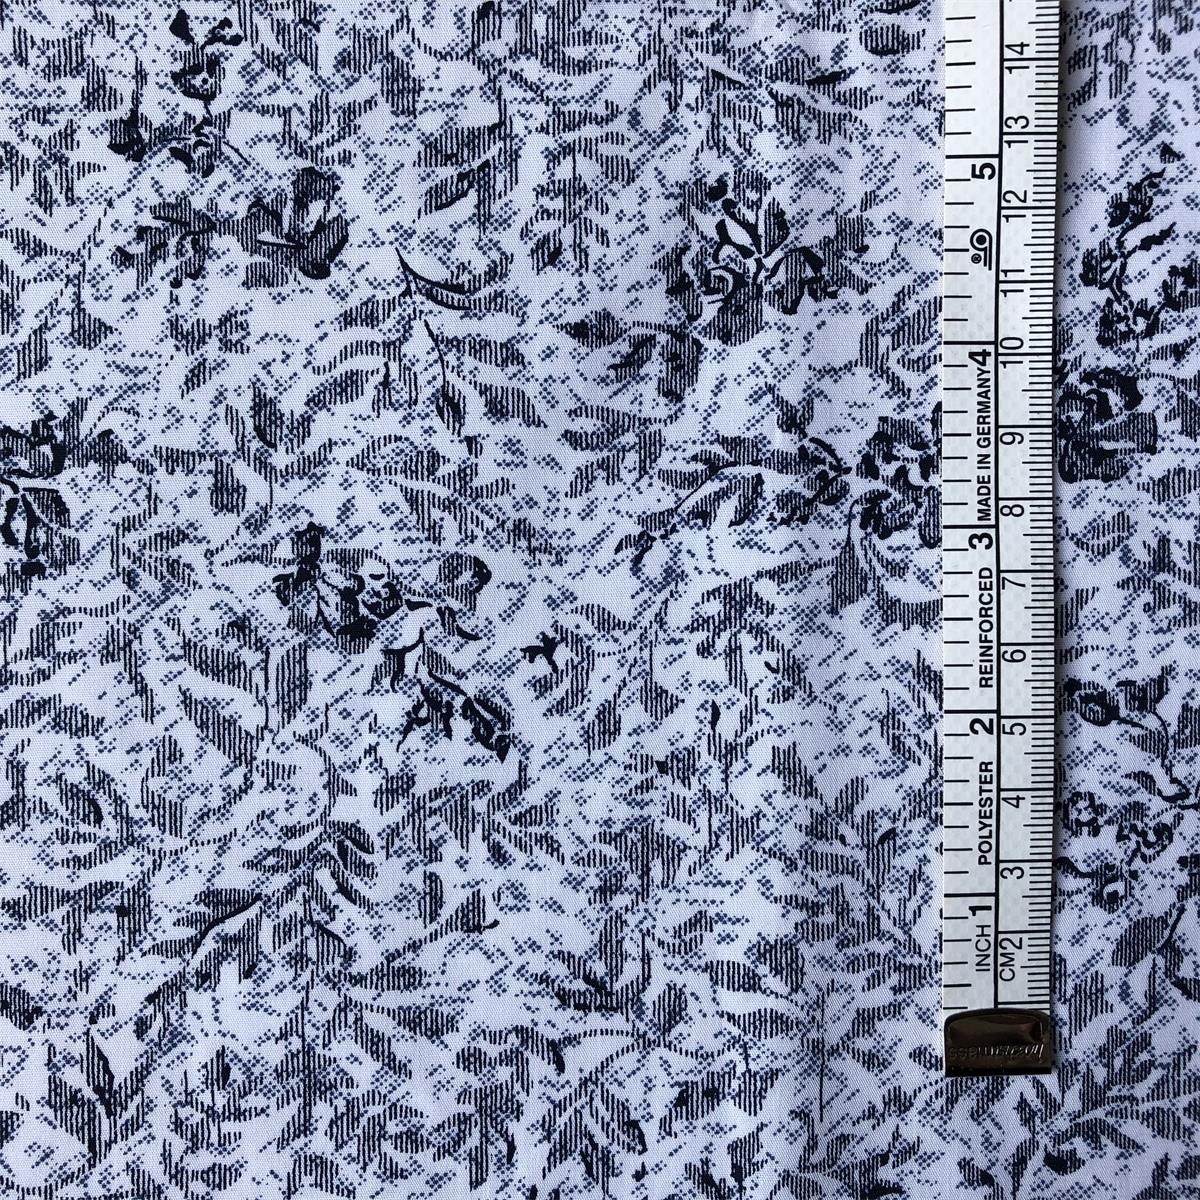 Hot Sun-rising Textile Cotton fabric hot sale high quality soft 100%cotton poplin printed fabric for men's shirts